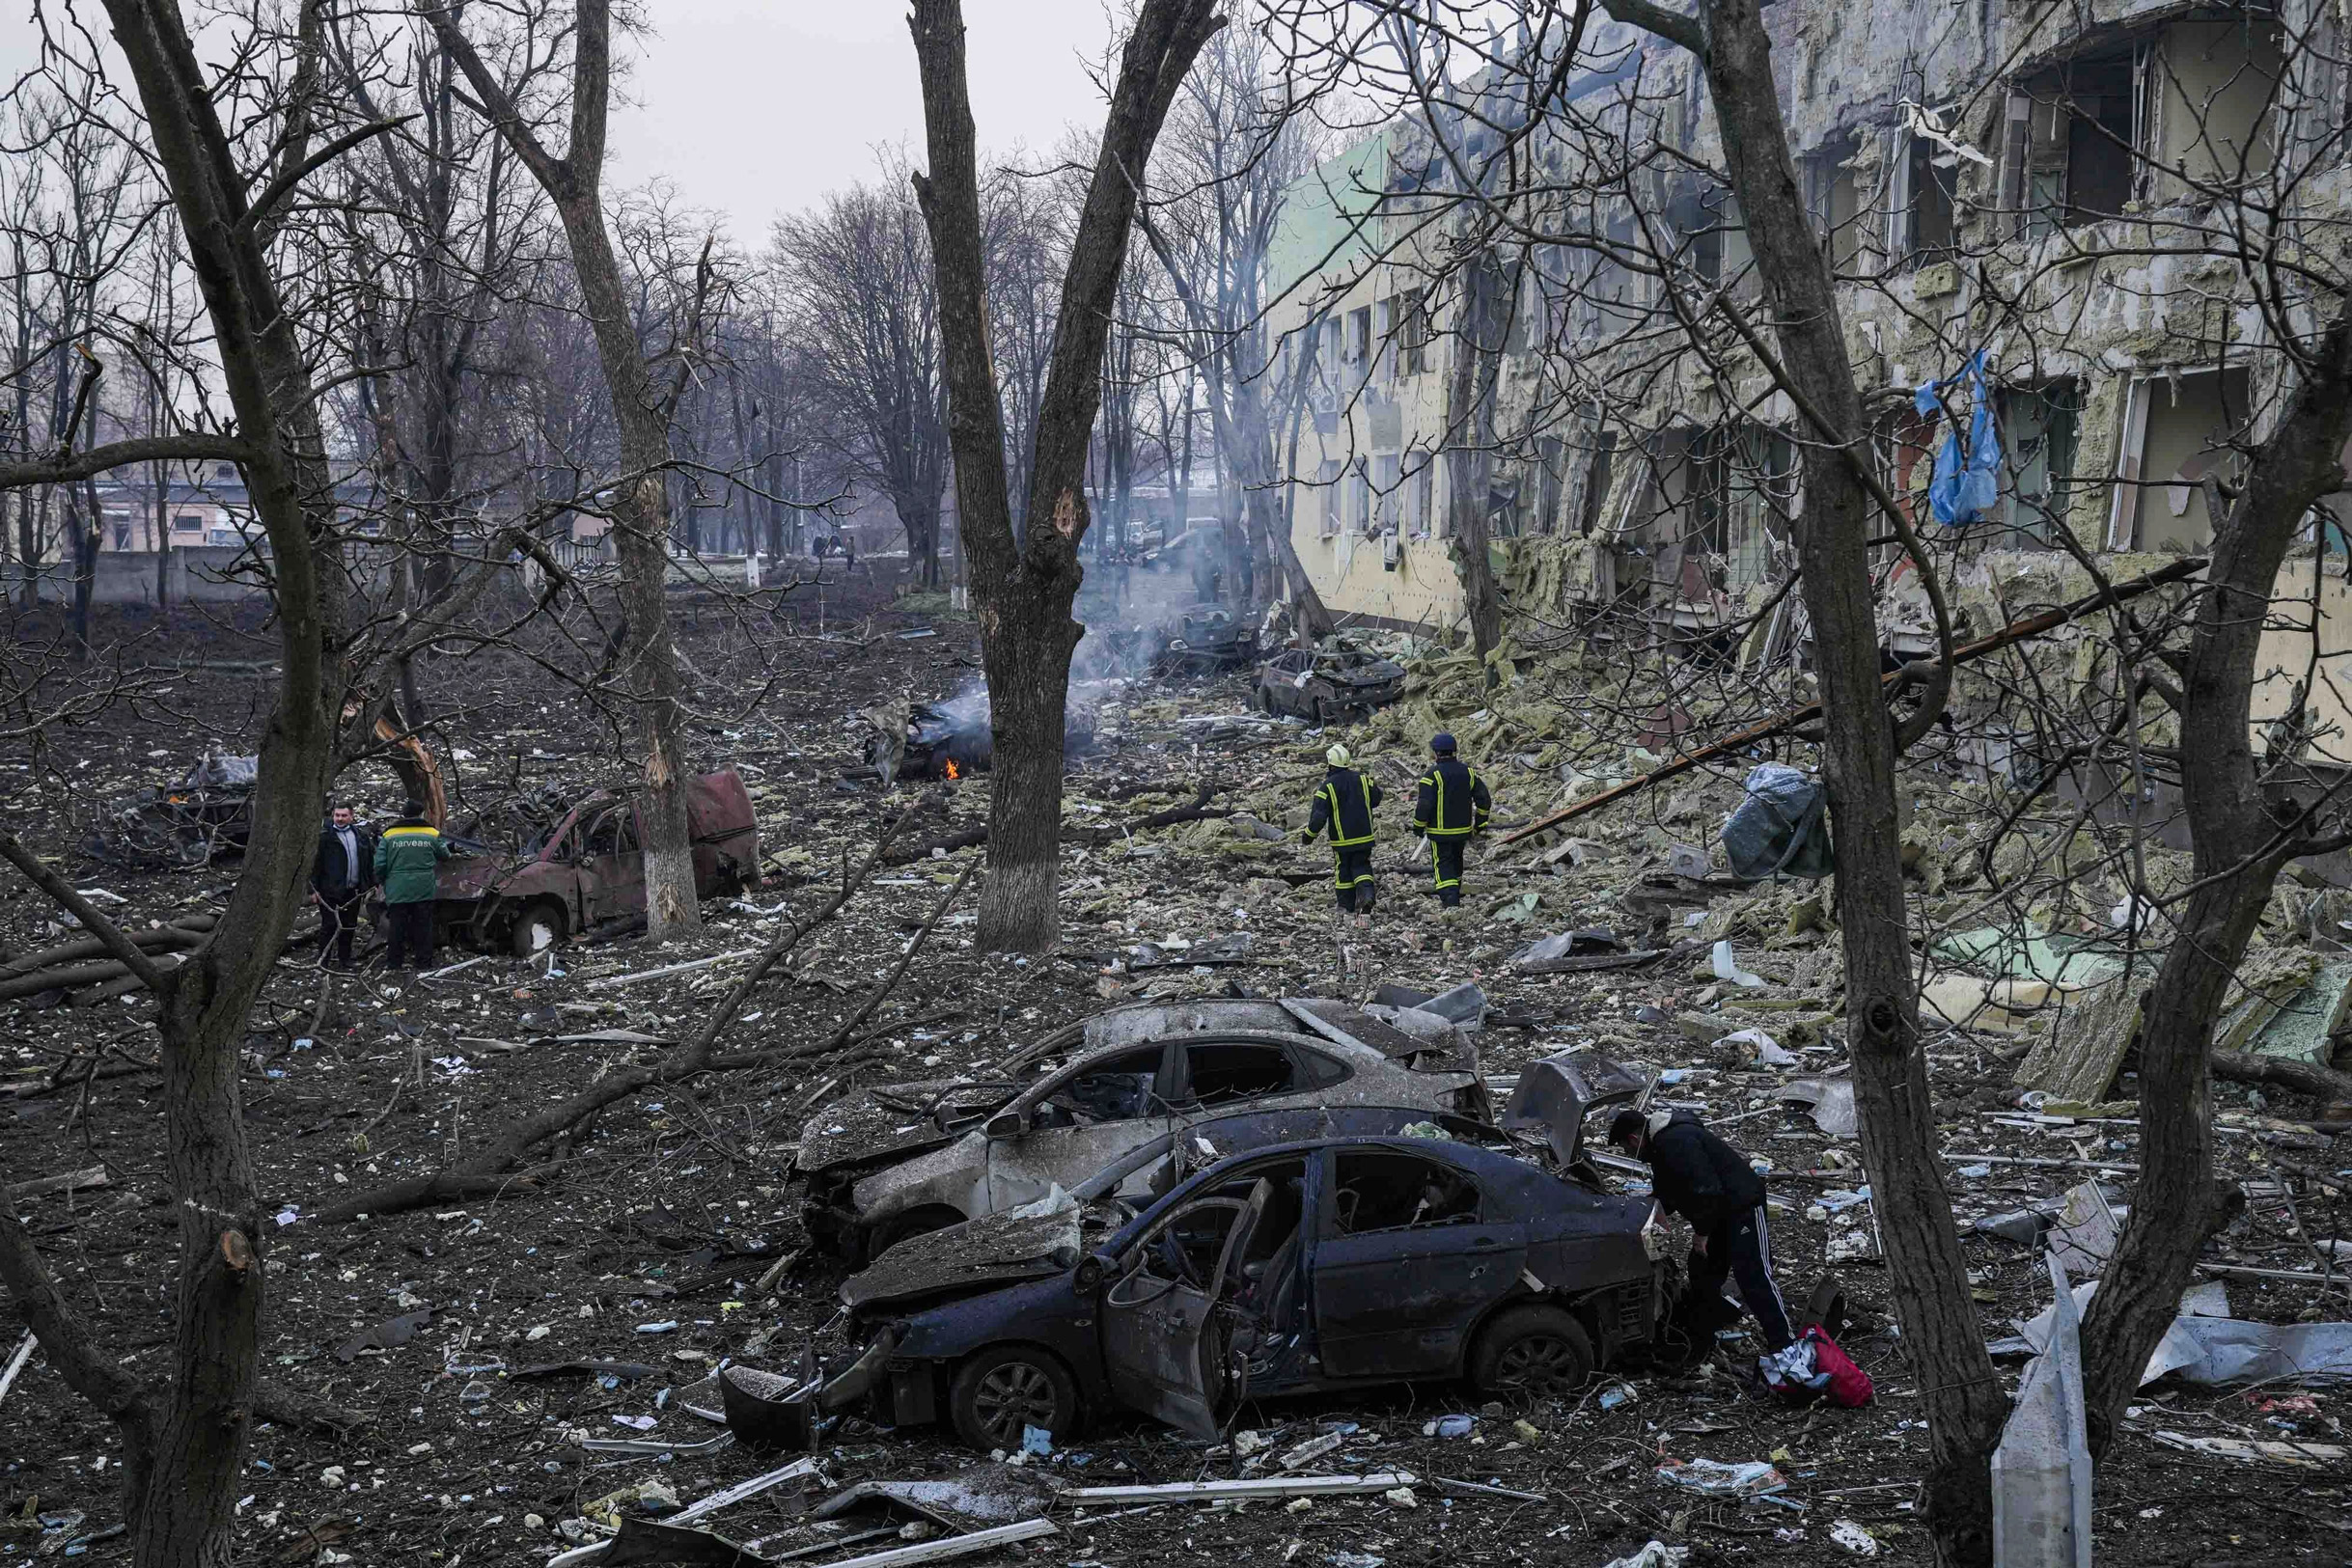 A scene of rubble, burnt-out cars and scorched trees outside a hospital building with blown out windows